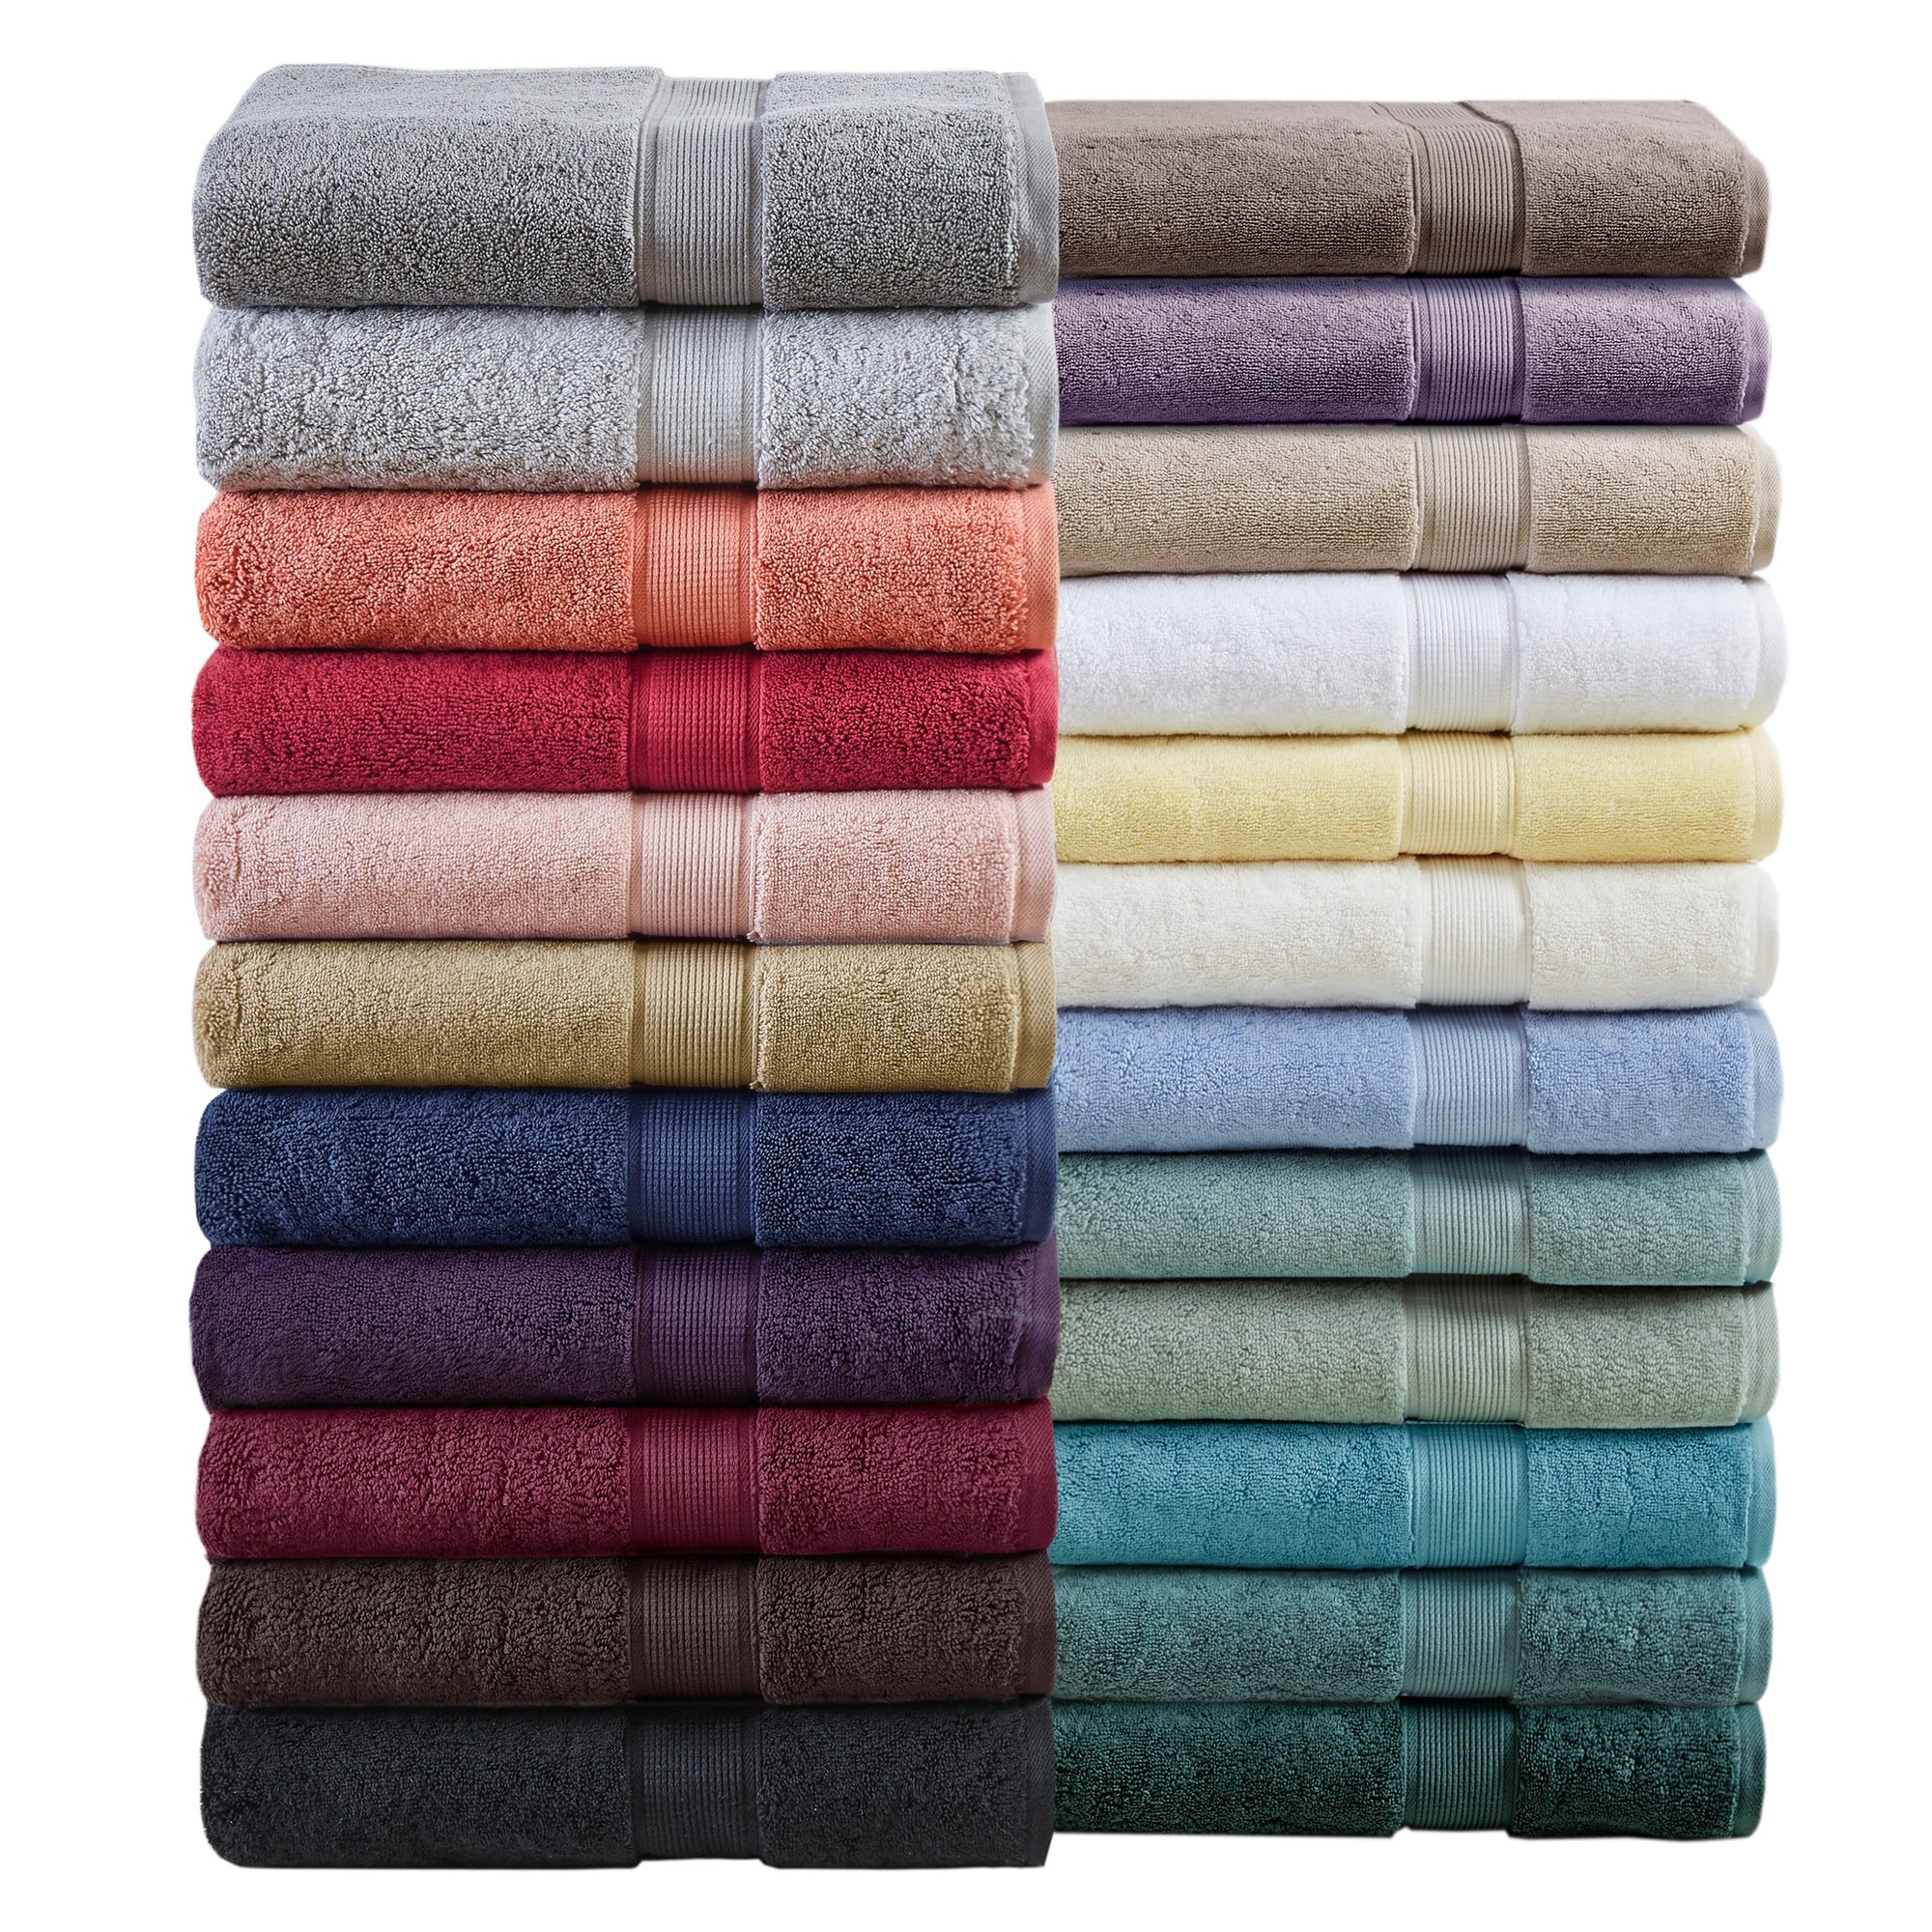 COTTON CRAFT Hotel Spa Luxury Bath Towel - 4 Pack - Oversized Extra Large  30 x 58 - Heavyweight 700 GSM 2 Ply Ringspun Cotton - Soft Absorbent